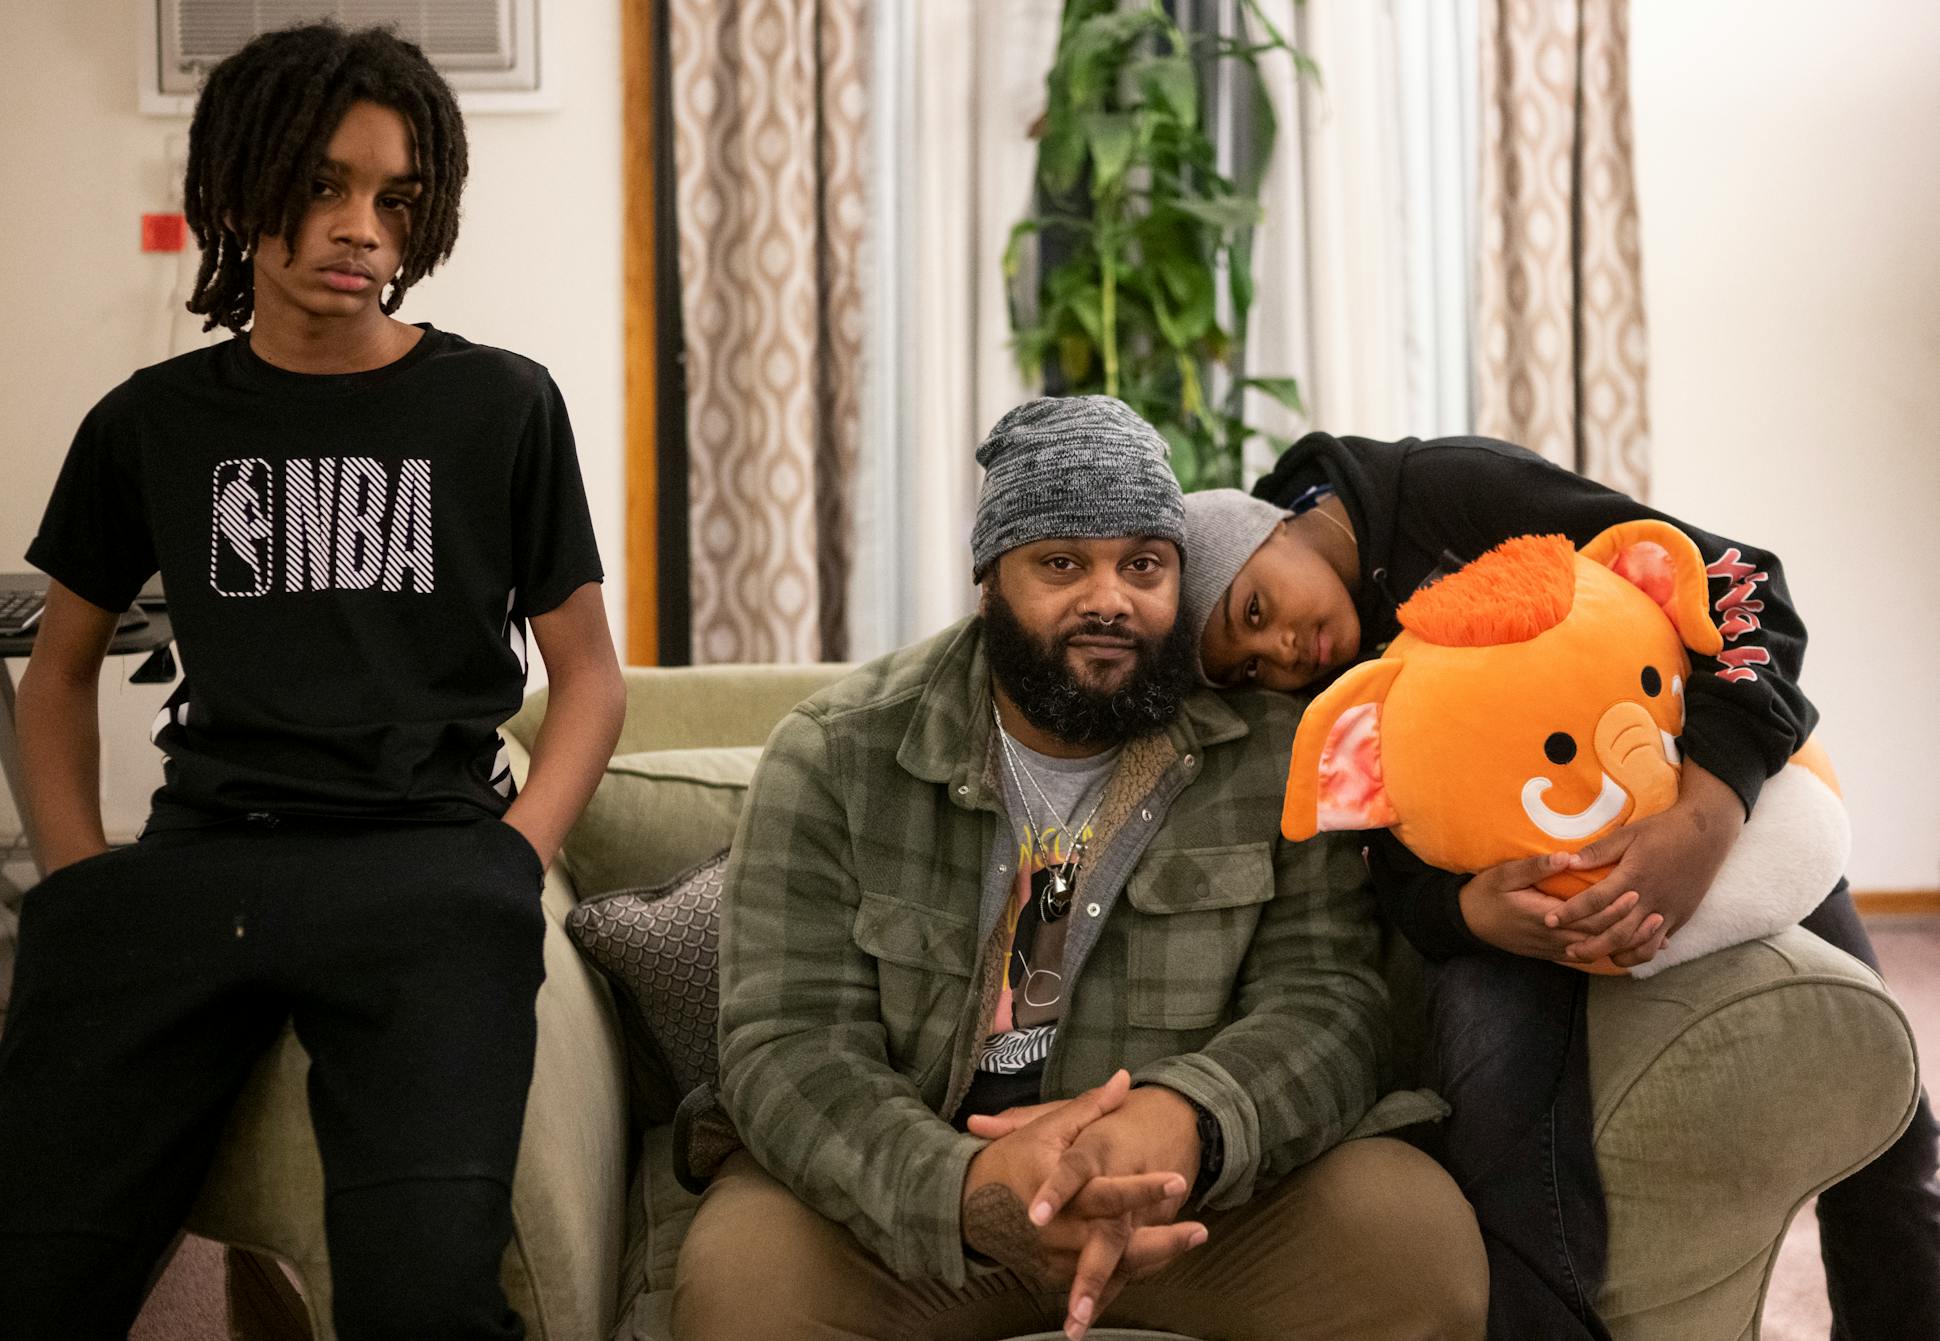 Cameron Taylor sits for a portrait with his 9-year-old daughter Isis and 11-year-old son Nasir at his girlfriend's apartment in Bloomington. Taylor was convicted of felony marijuana possession a decade ago.